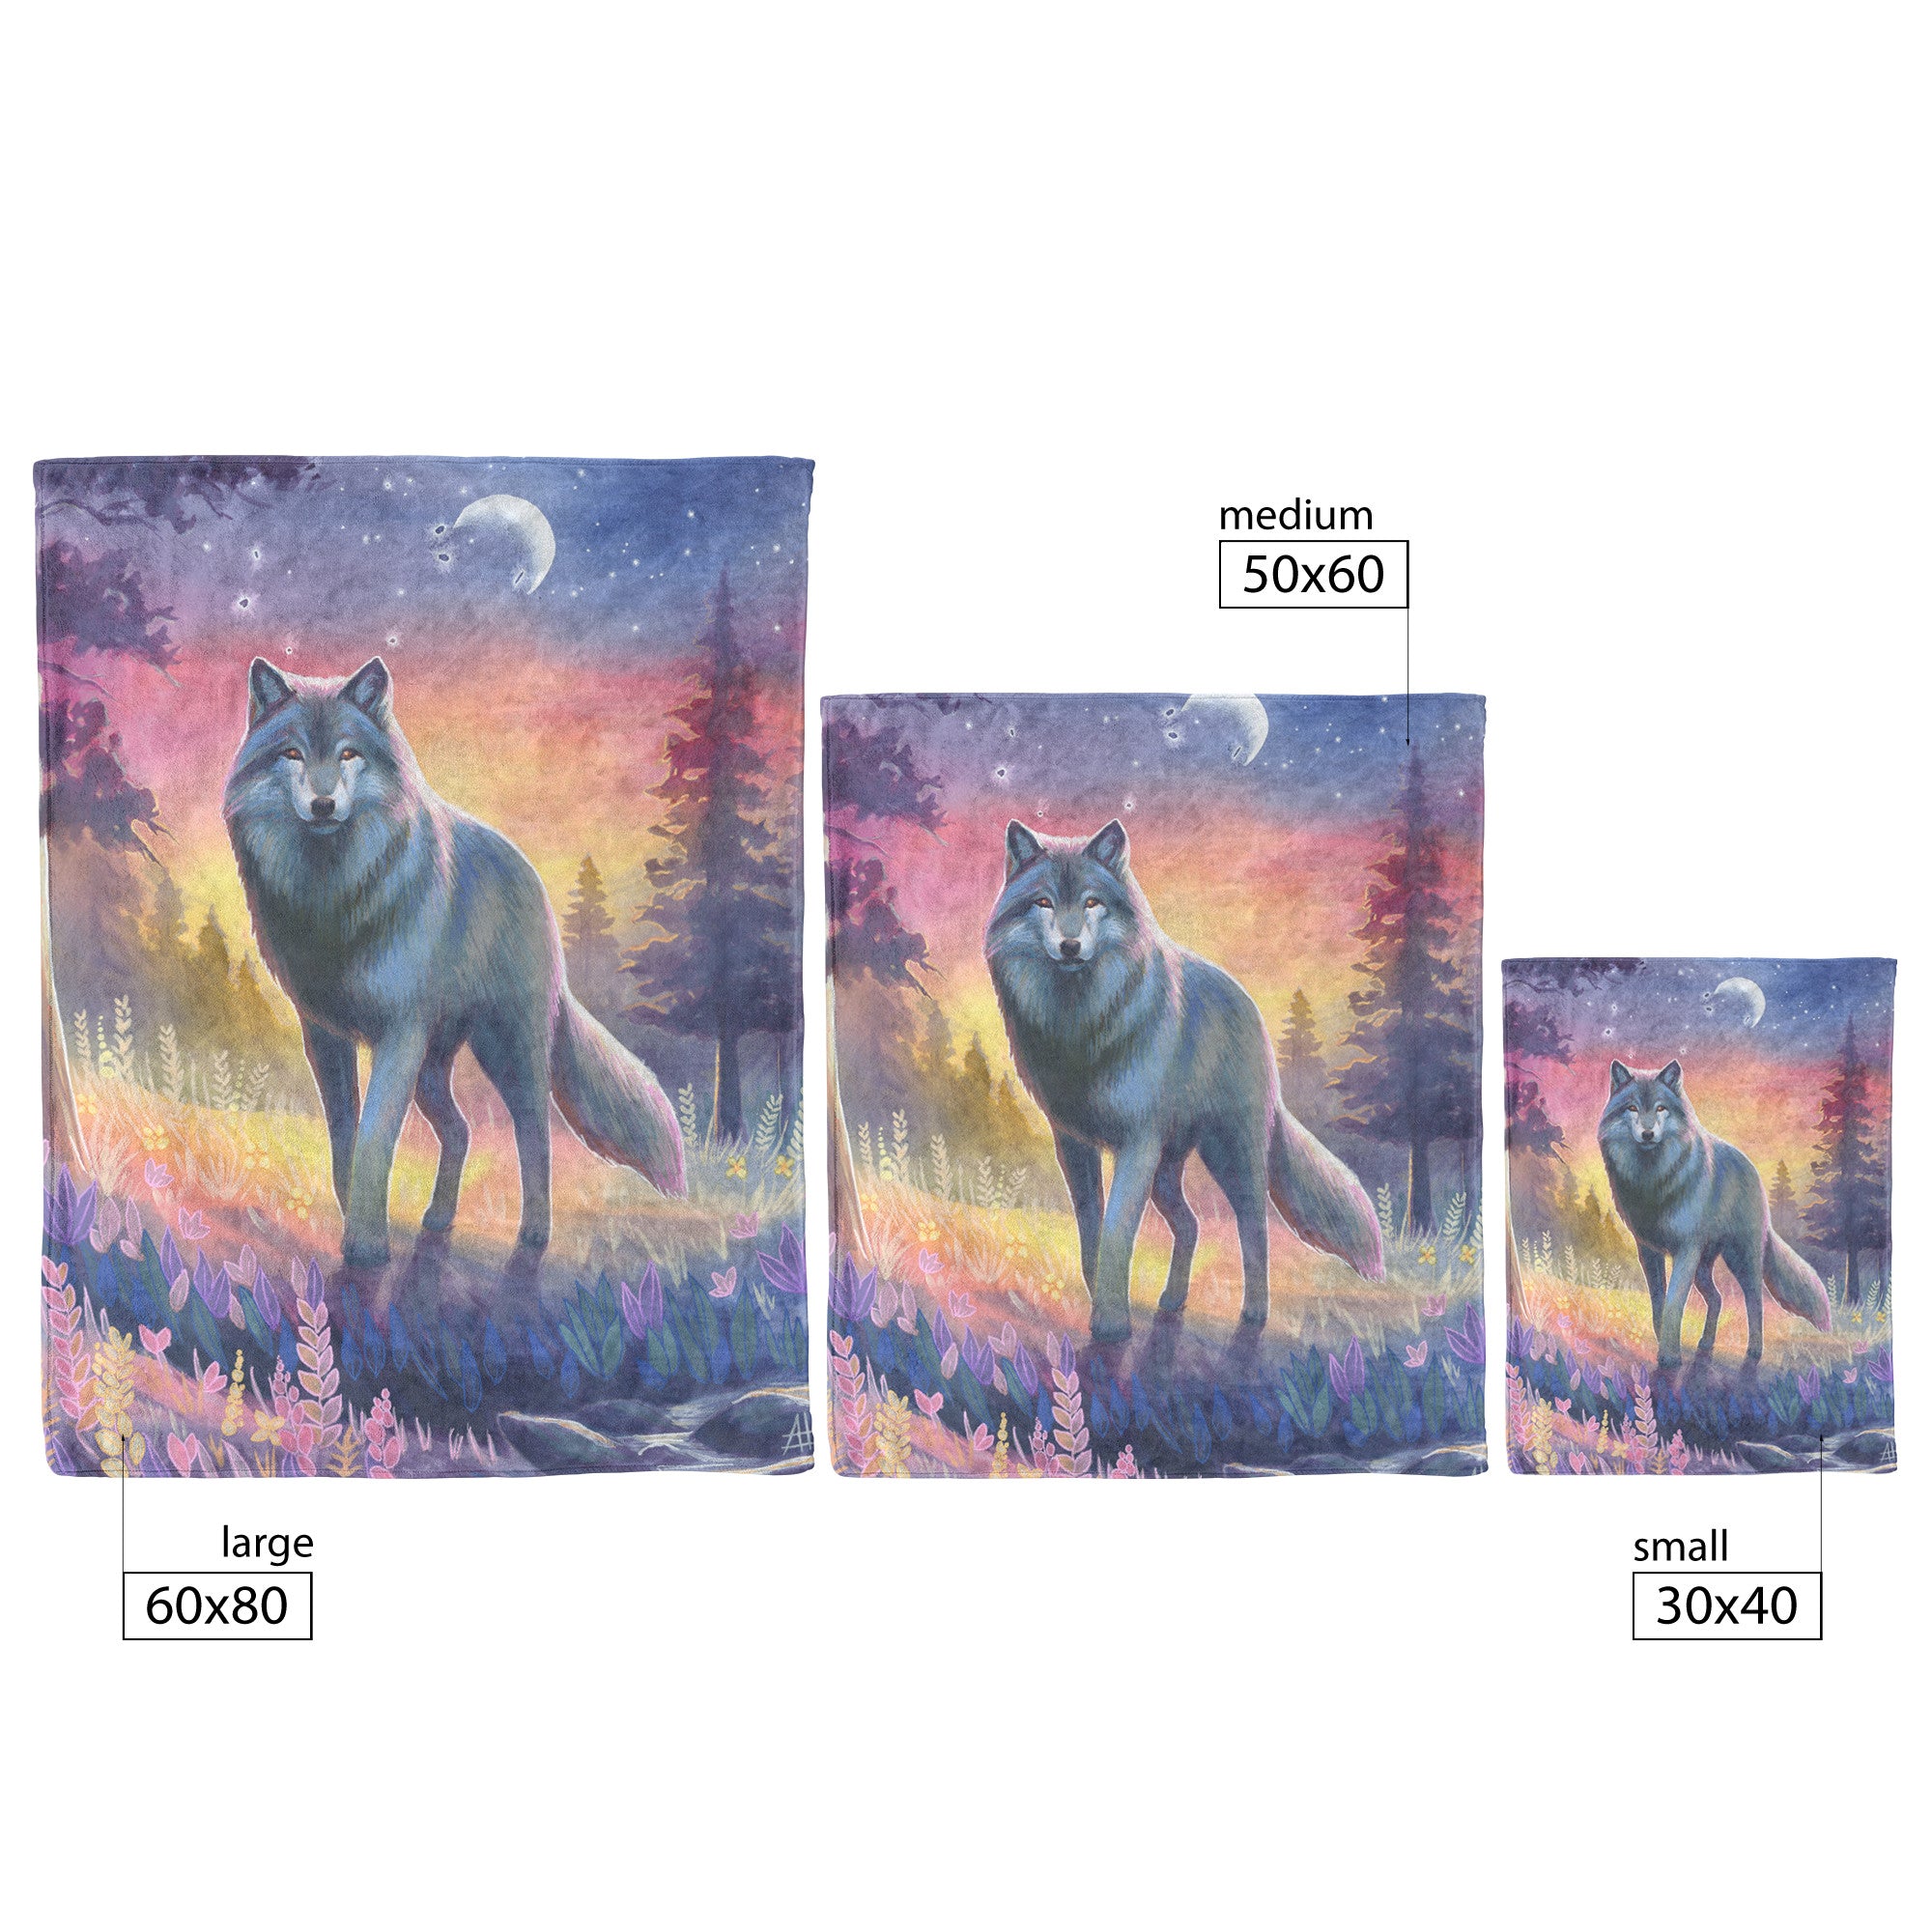 Three Wolf Blankets featuring a wolf in a twilight forest, varying in size from small to large, each with dimensions labeled.